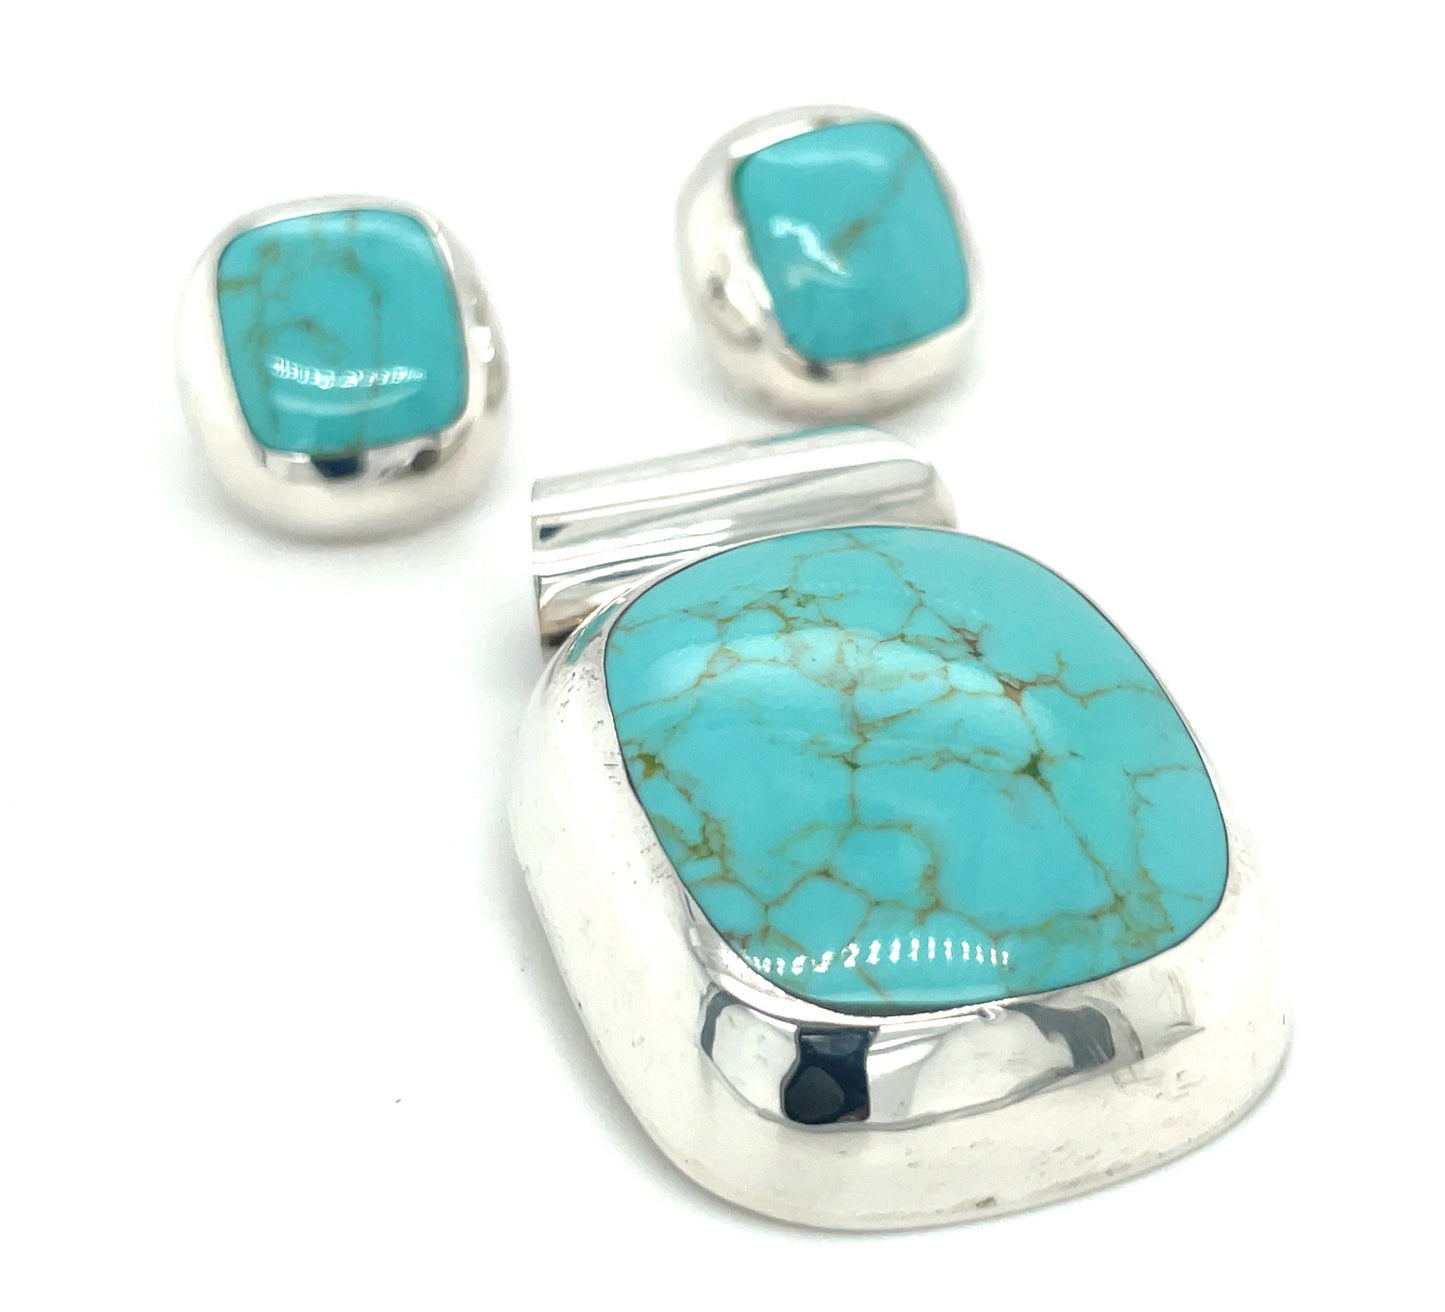 Vintage Turquoise Earrings and Pendant Set Mexico